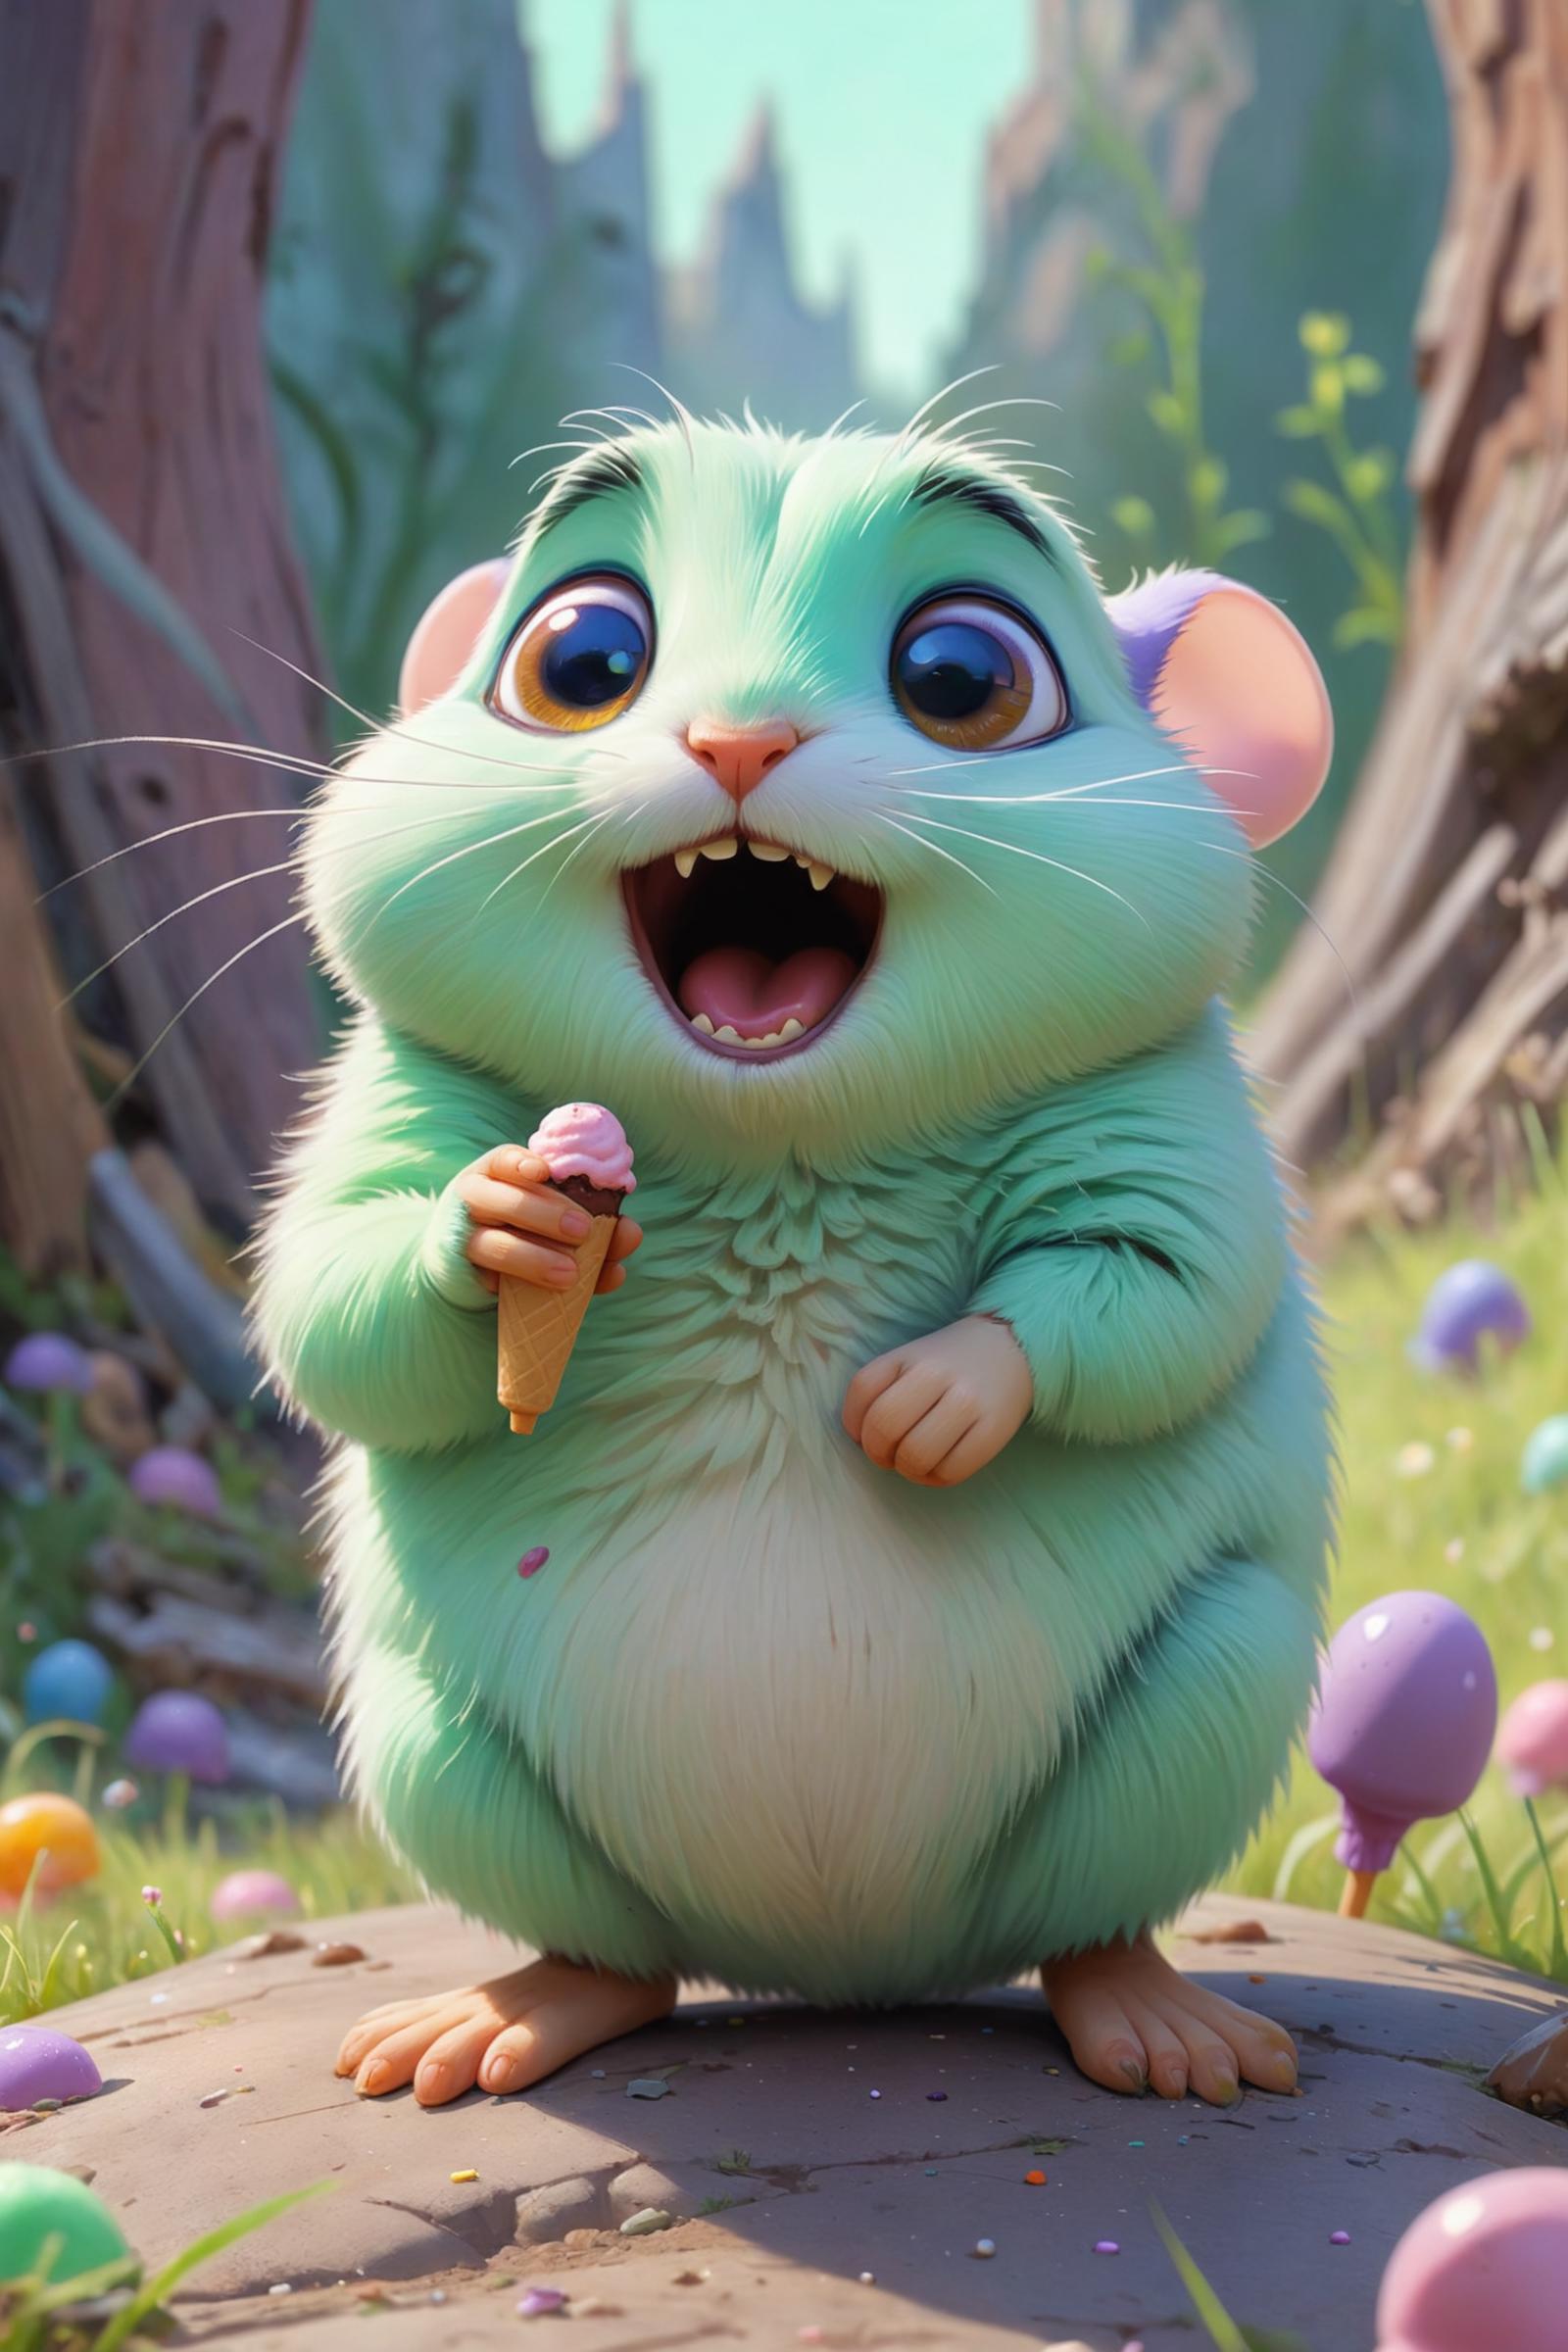 An animated green rabbit character holding an ice cream cone.